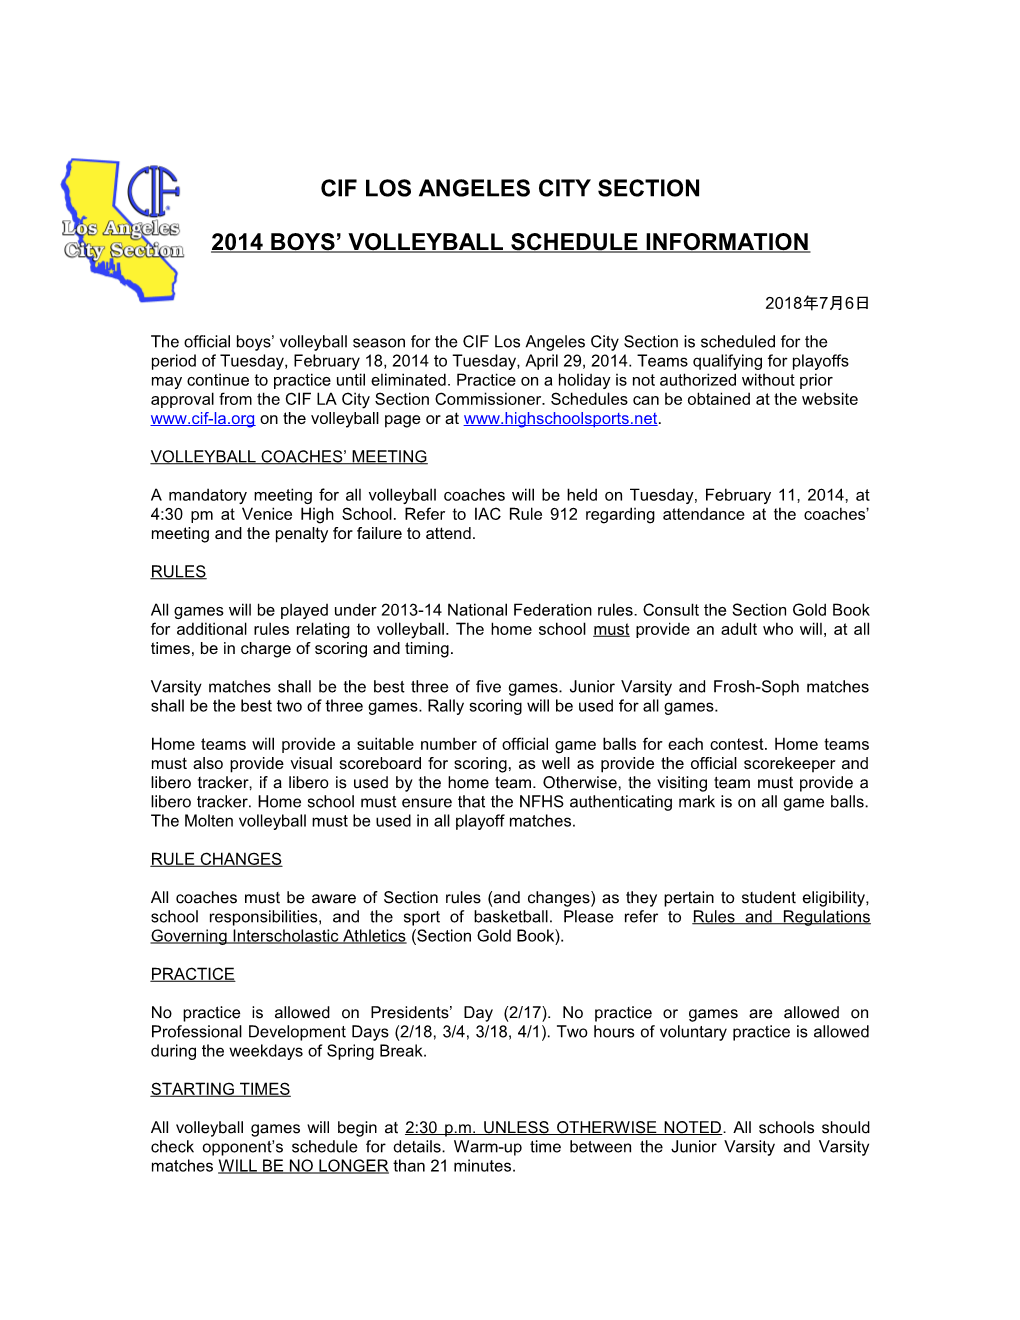 Cif Los Angeles City Section s14